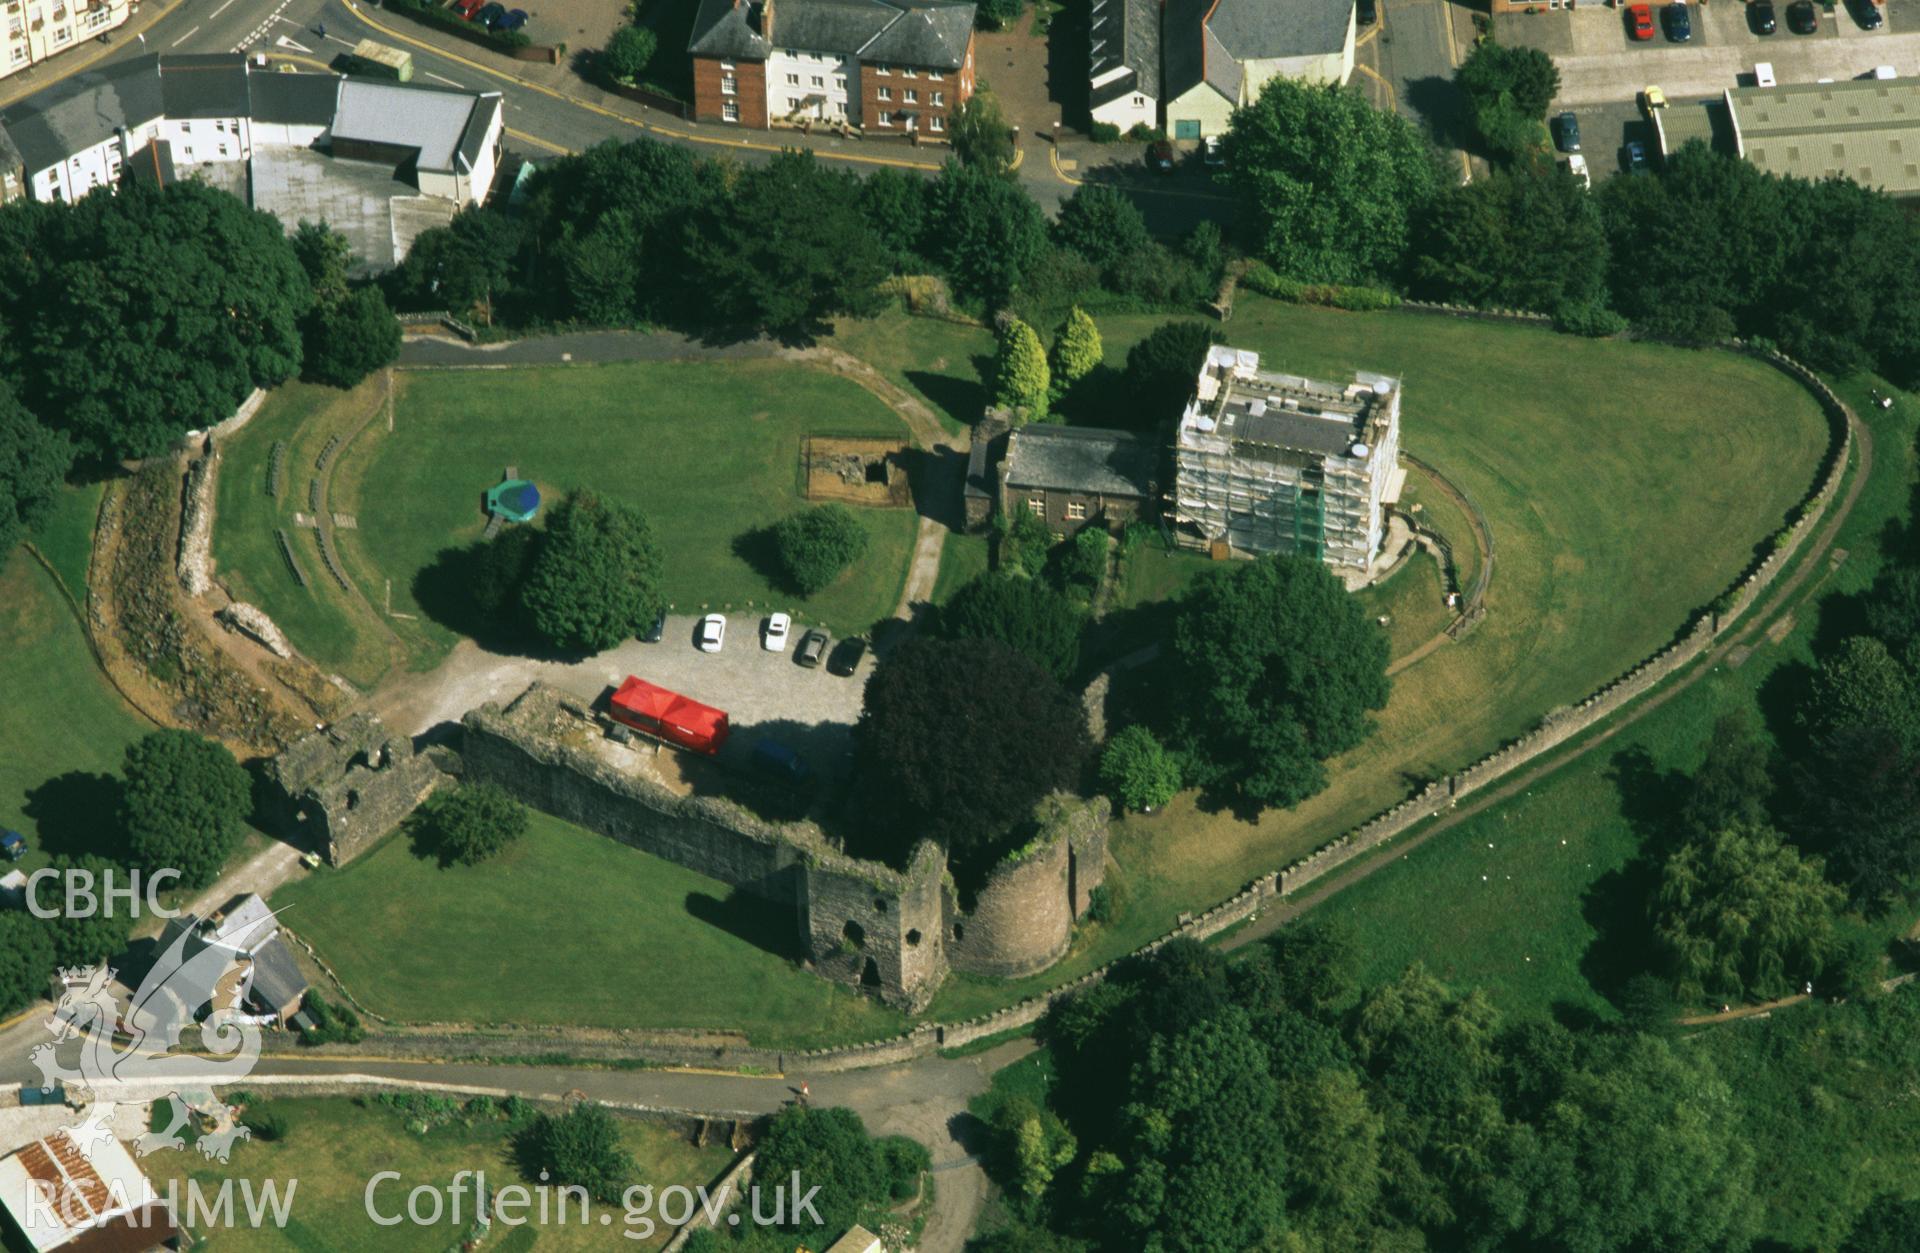 Slide of RCAHMW colour oblique aerial photograph of Abergavenny Castle, taken by Toby Driver, 2003.